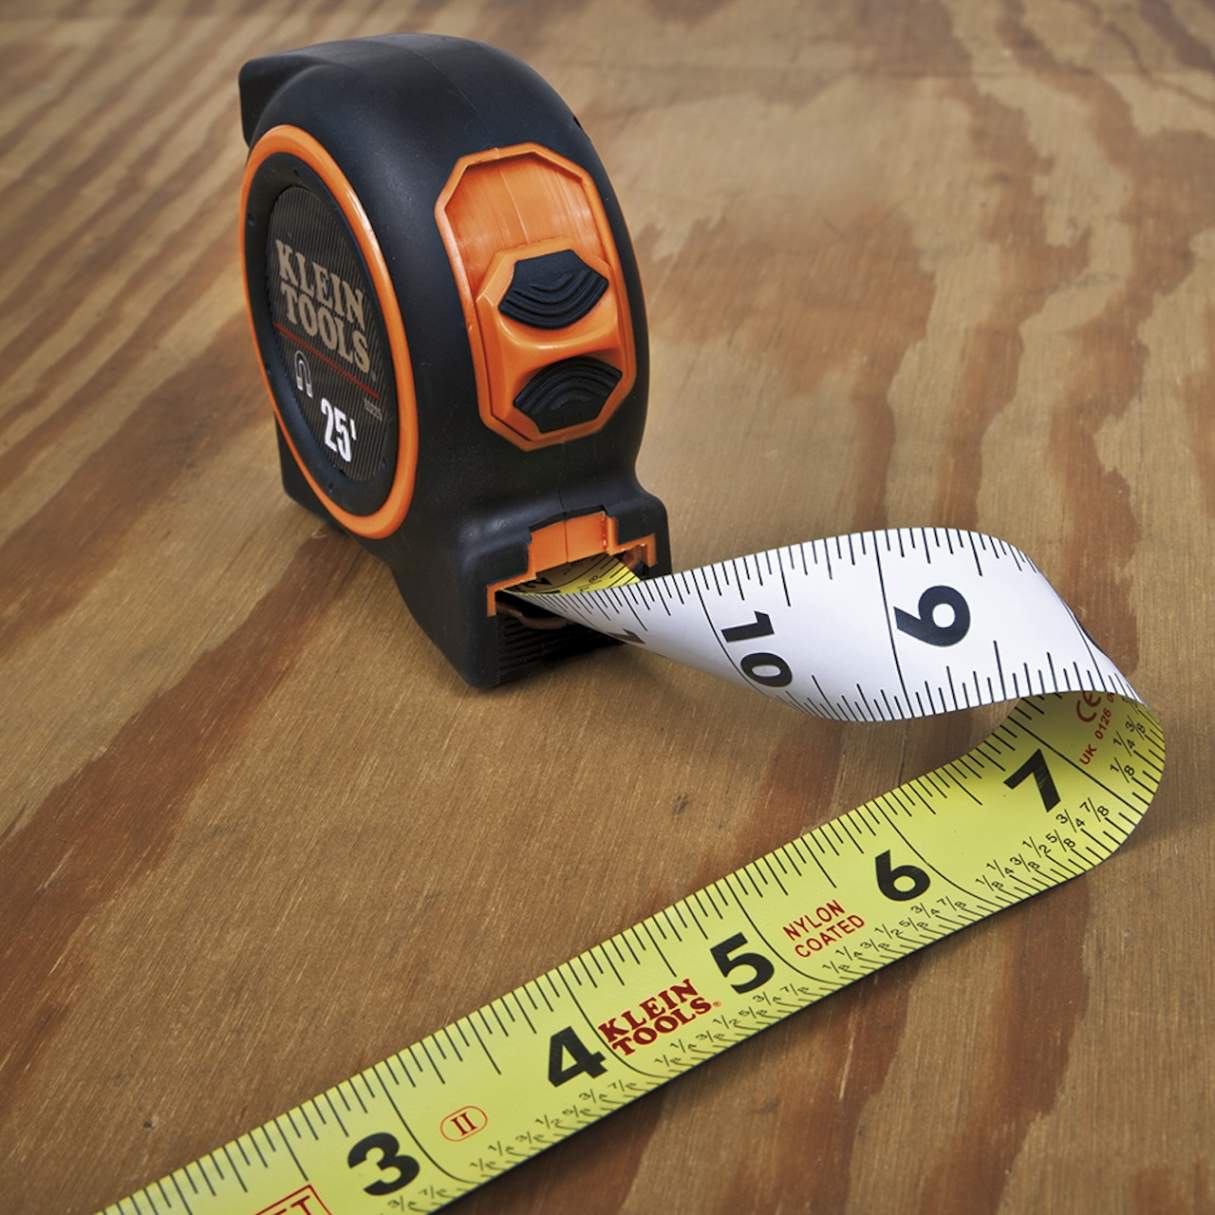 Wide Blade Tape Measure - 25ft - Engineer's/Dual Scale